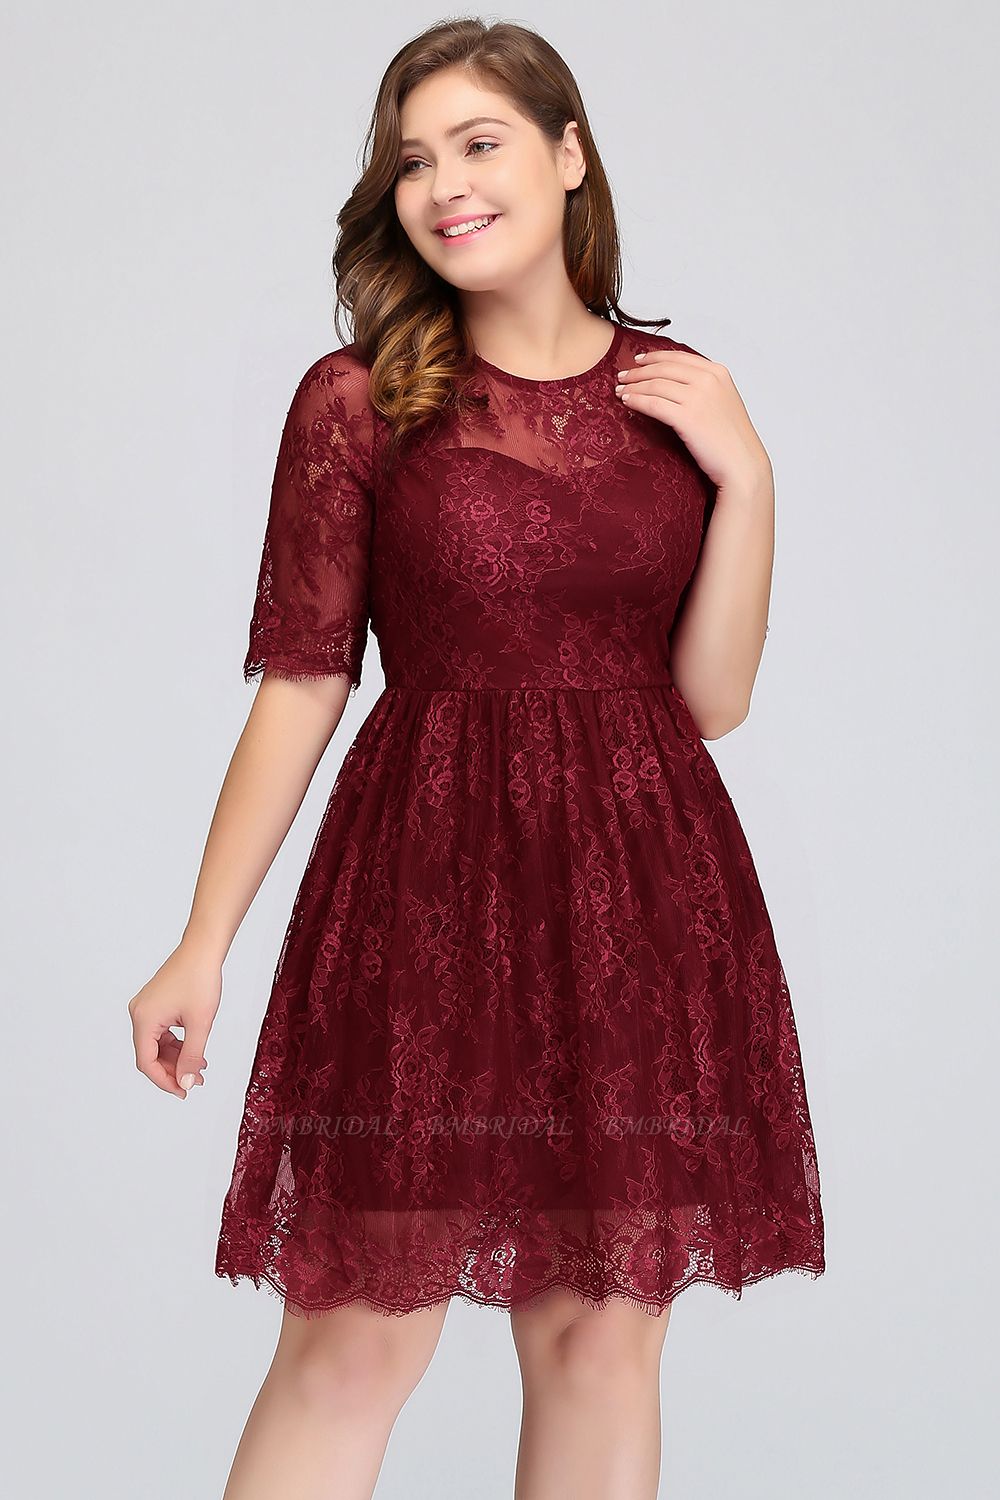 BMbridal Plus size Jewel Burgundy Affordable Bridesmaid Dress with Short Sleeves